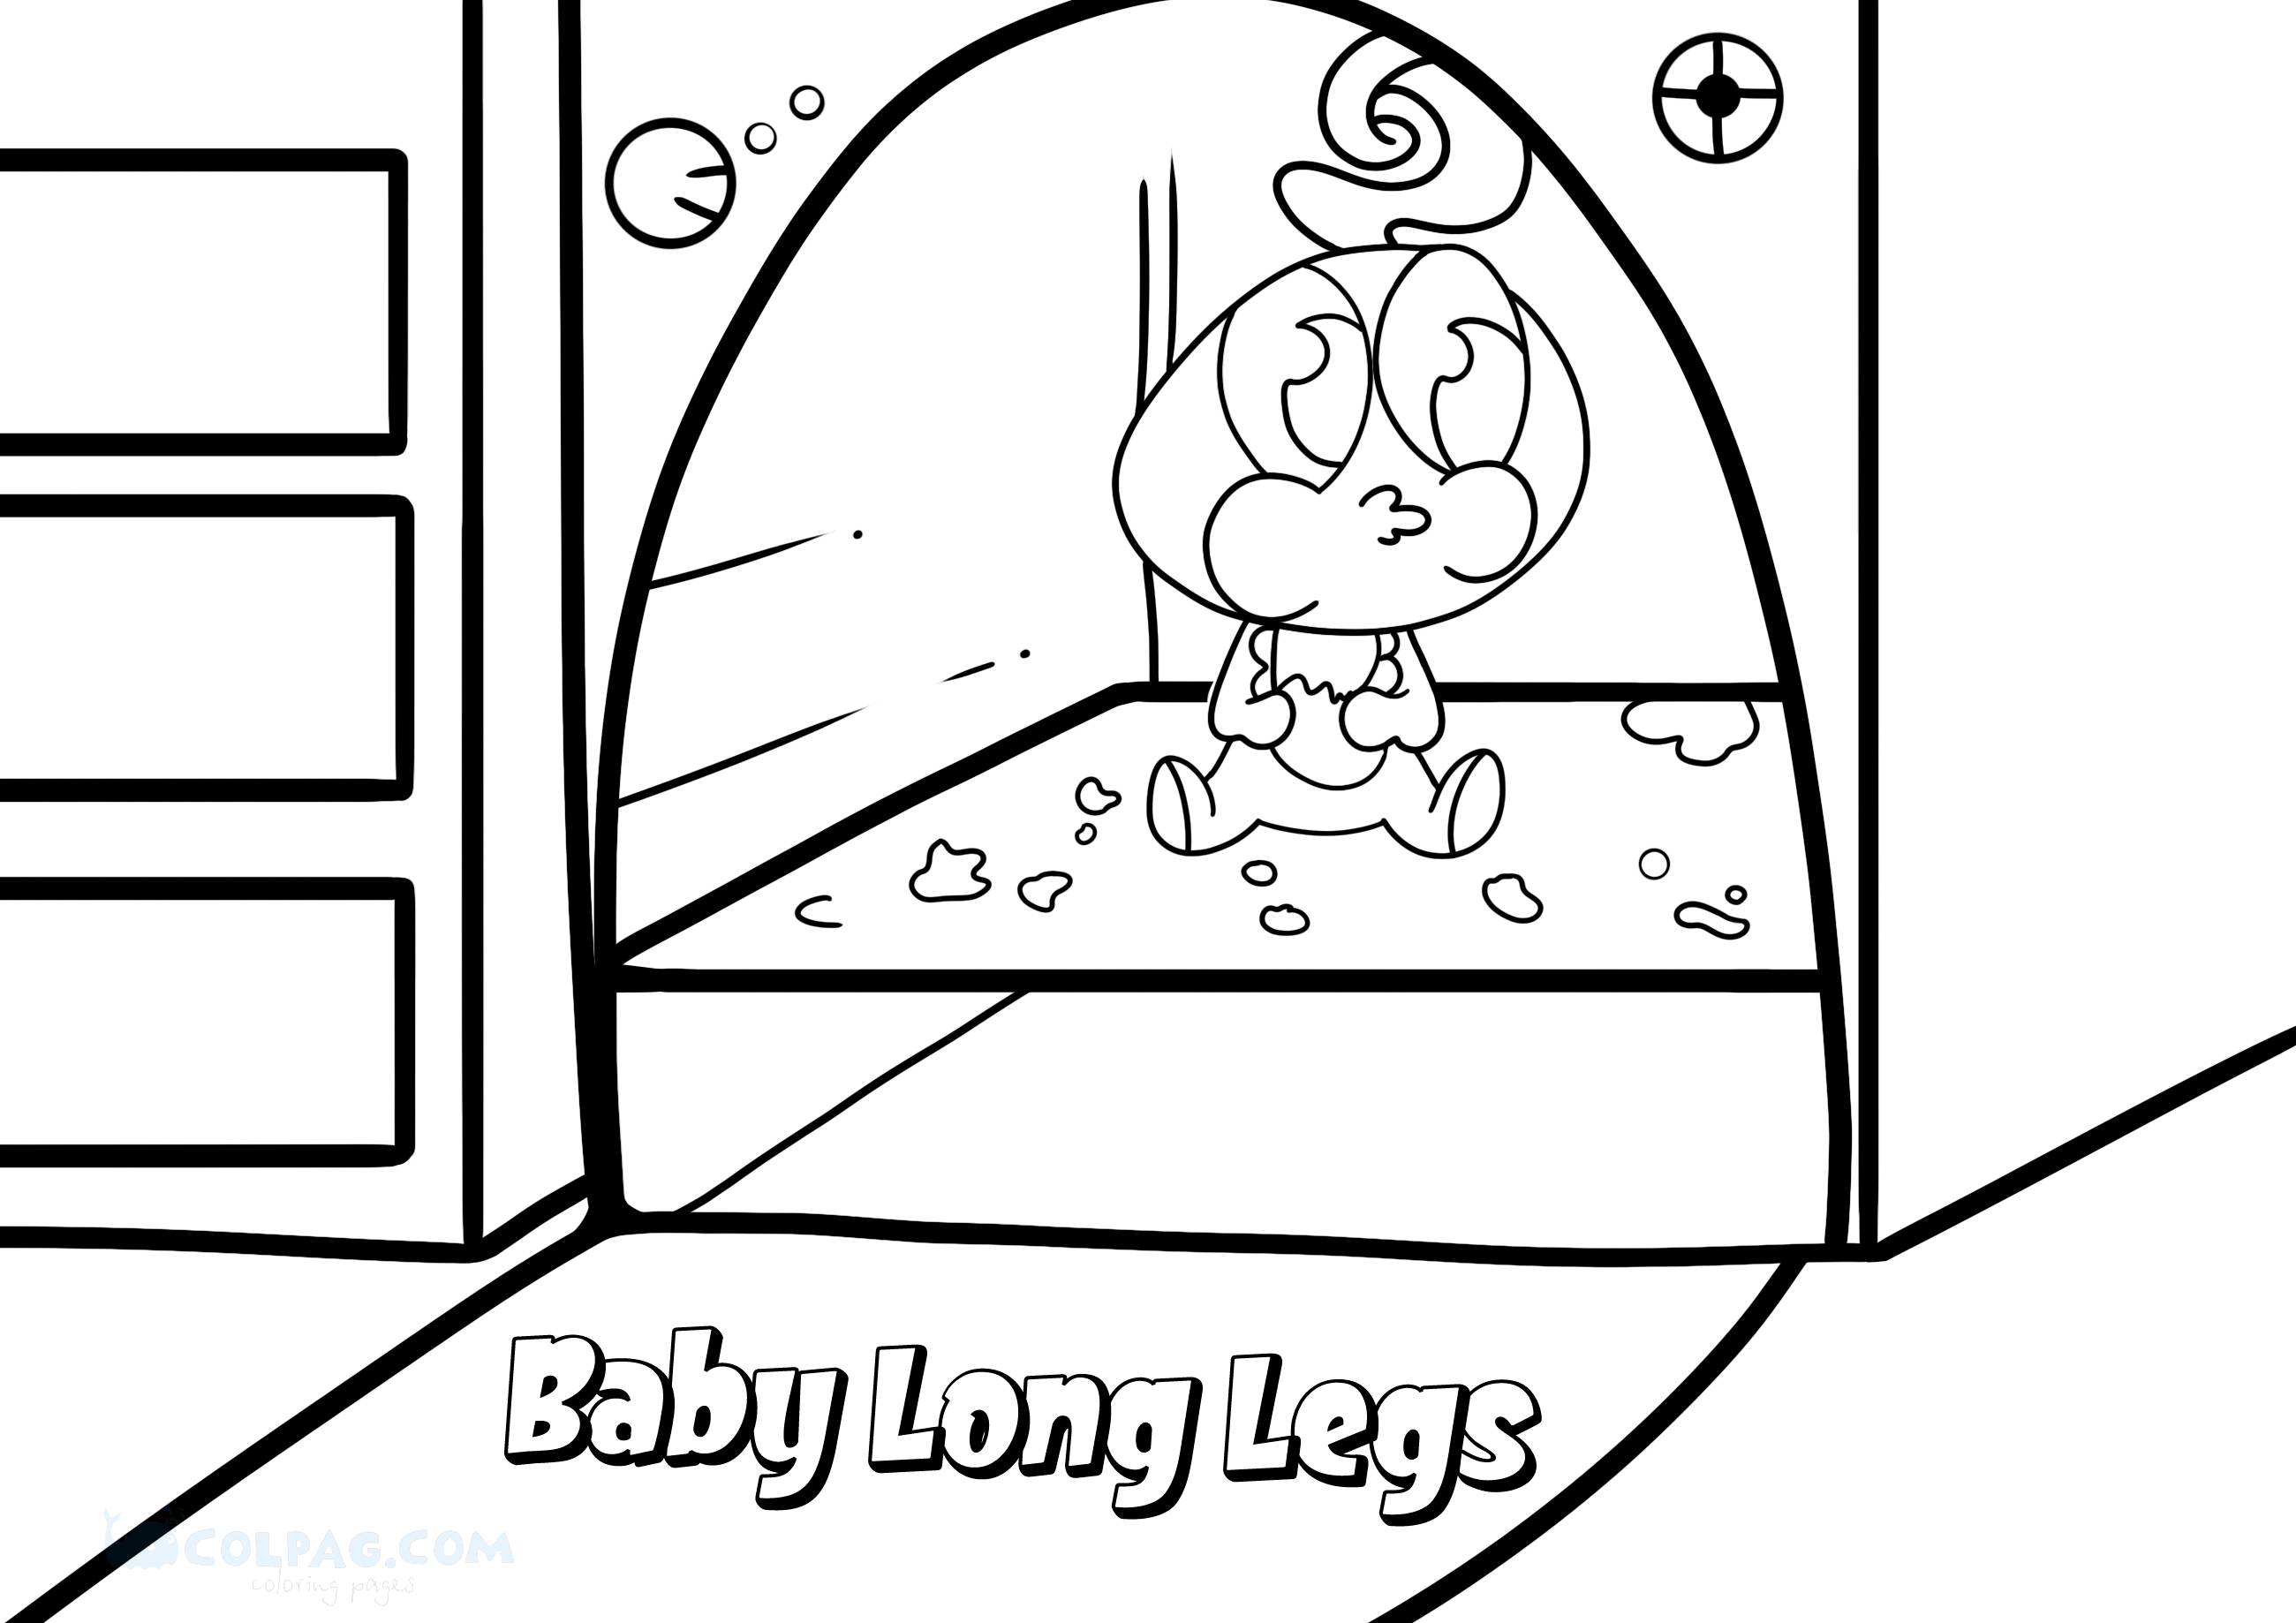 baby-long-legs-coloring-page-colpag-com-13